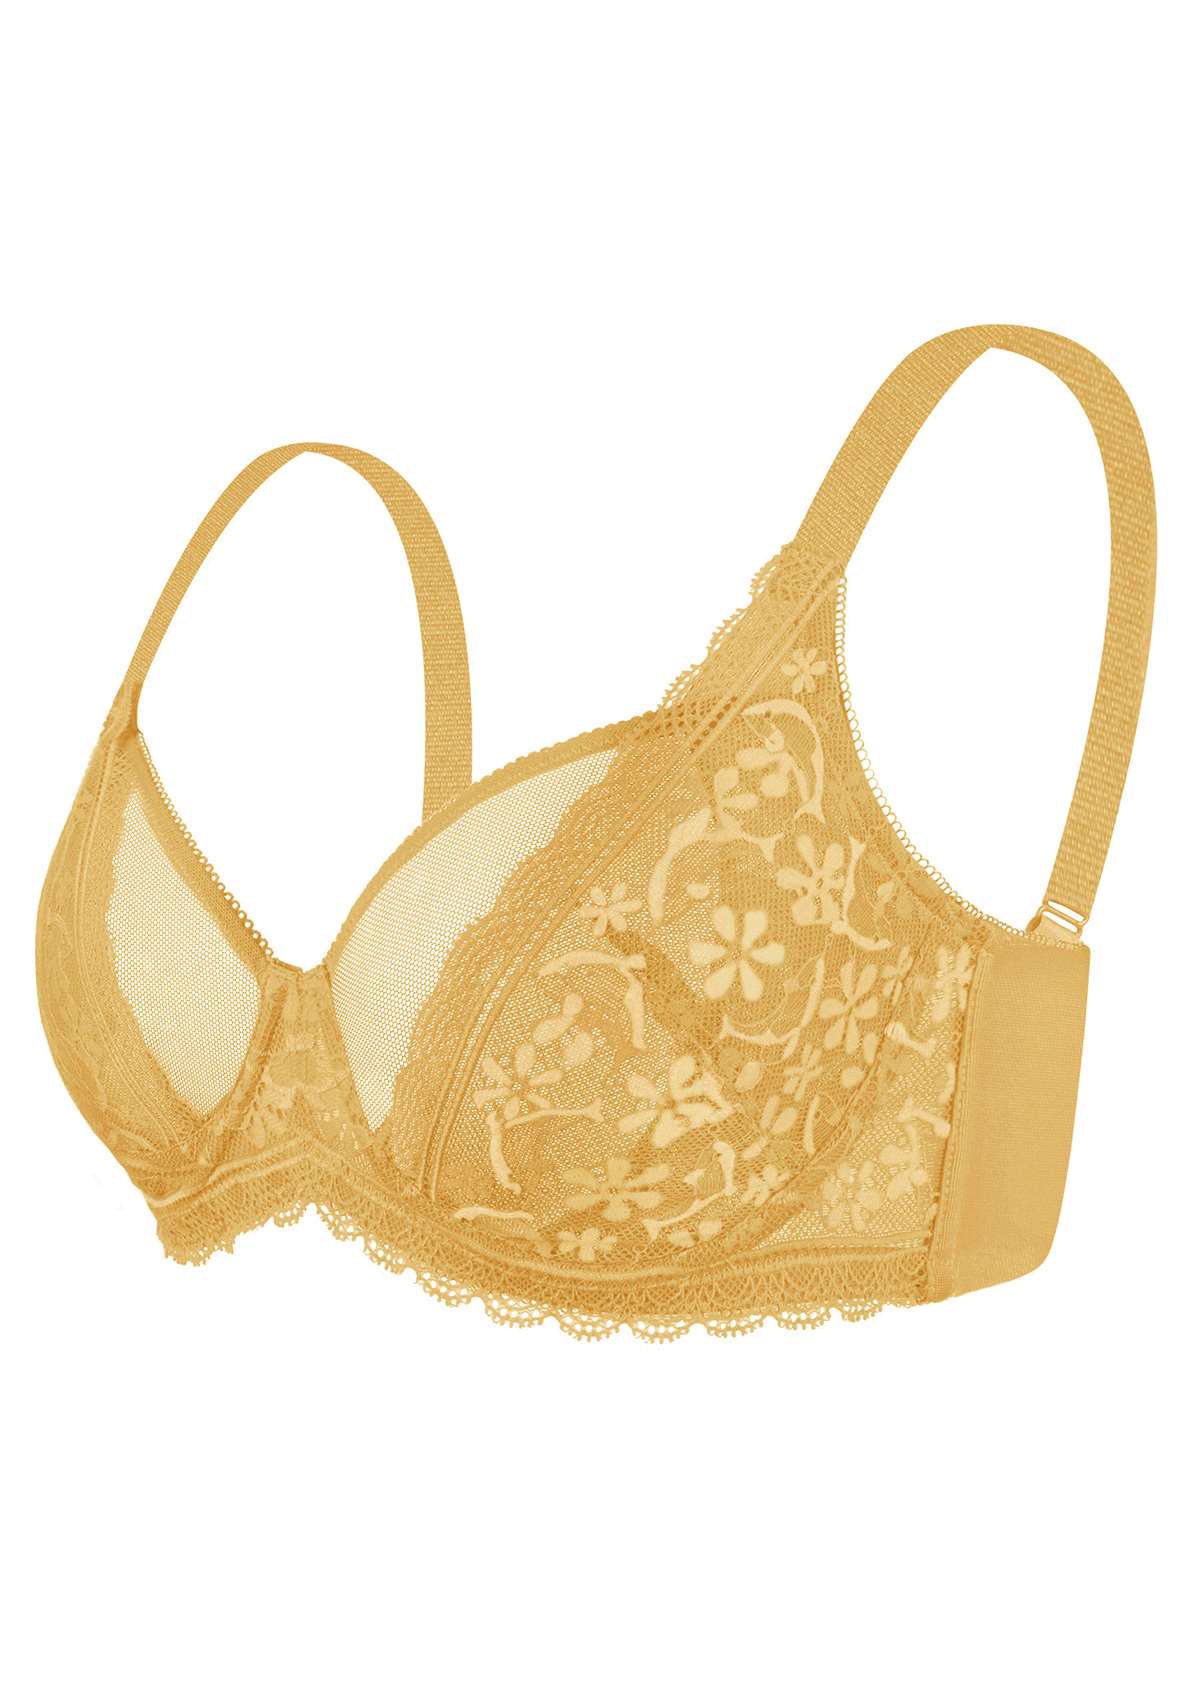 HSIA Anemone Lace Unlined Bra: Supportive, Lightweight Bra - Ginger / 38 / DDD/F